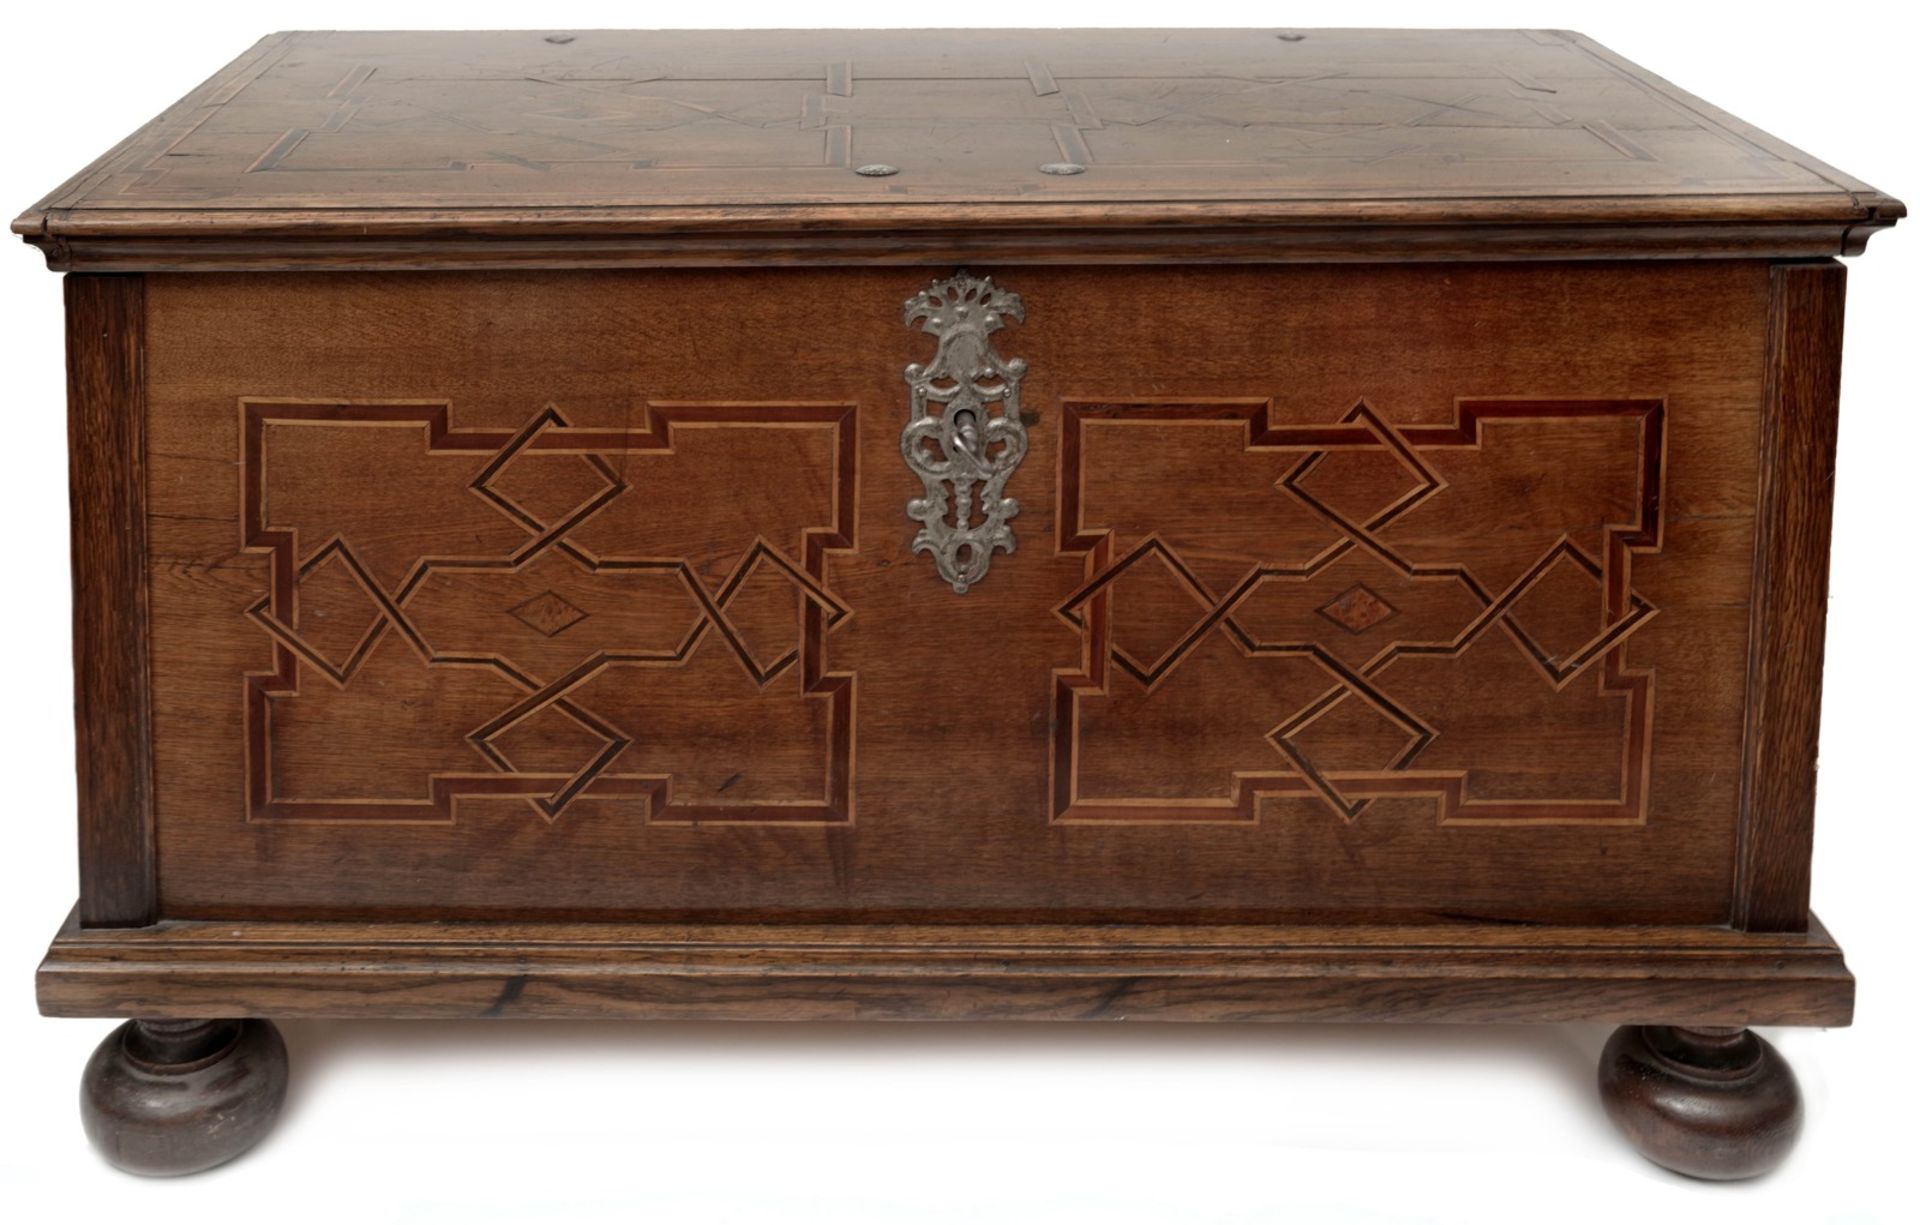 A Baroque Chest